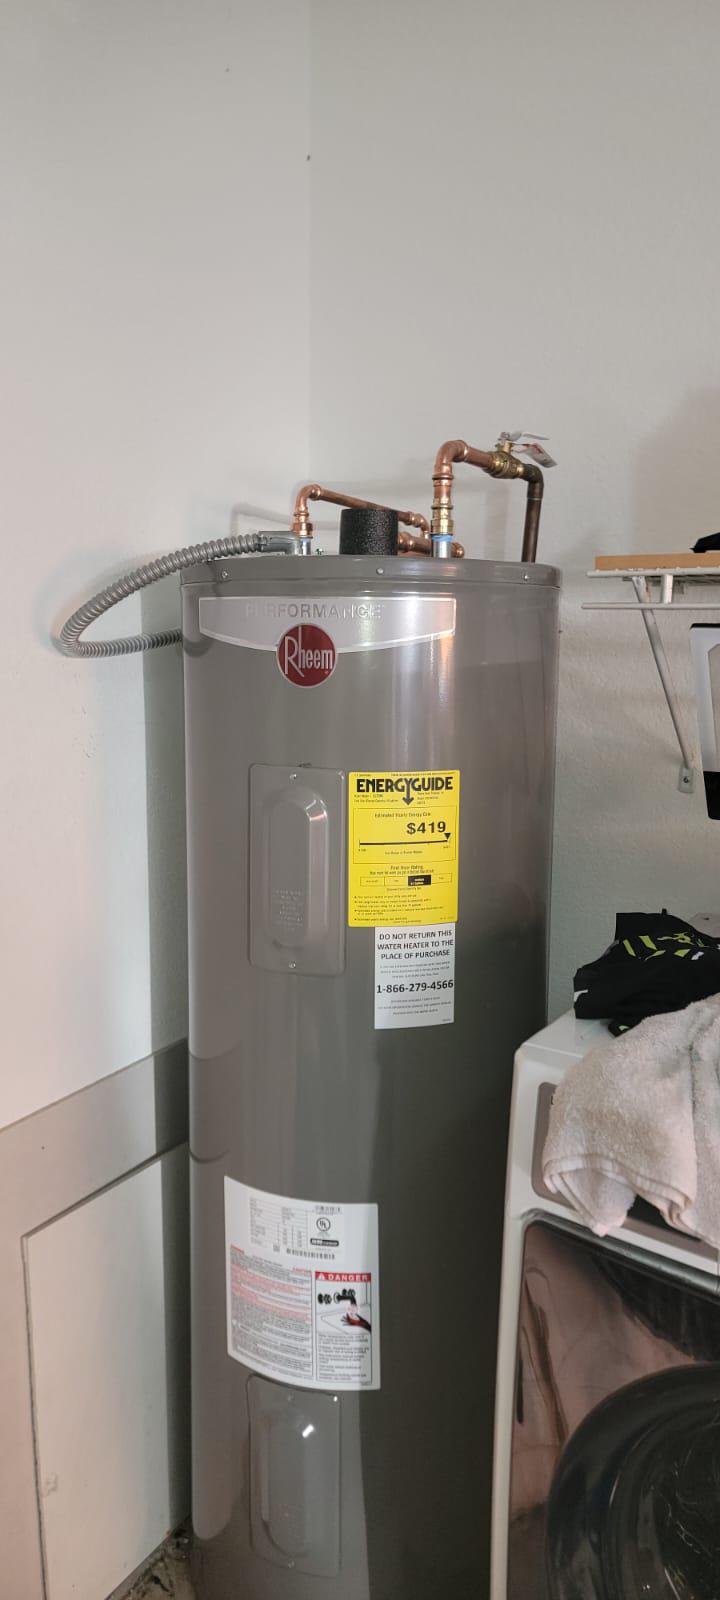 Installing a Rheem Water Heater in South Miami on 9739 SW 92nd Ter Miami, Florida 33186 - Miami 24/7 Plumbing